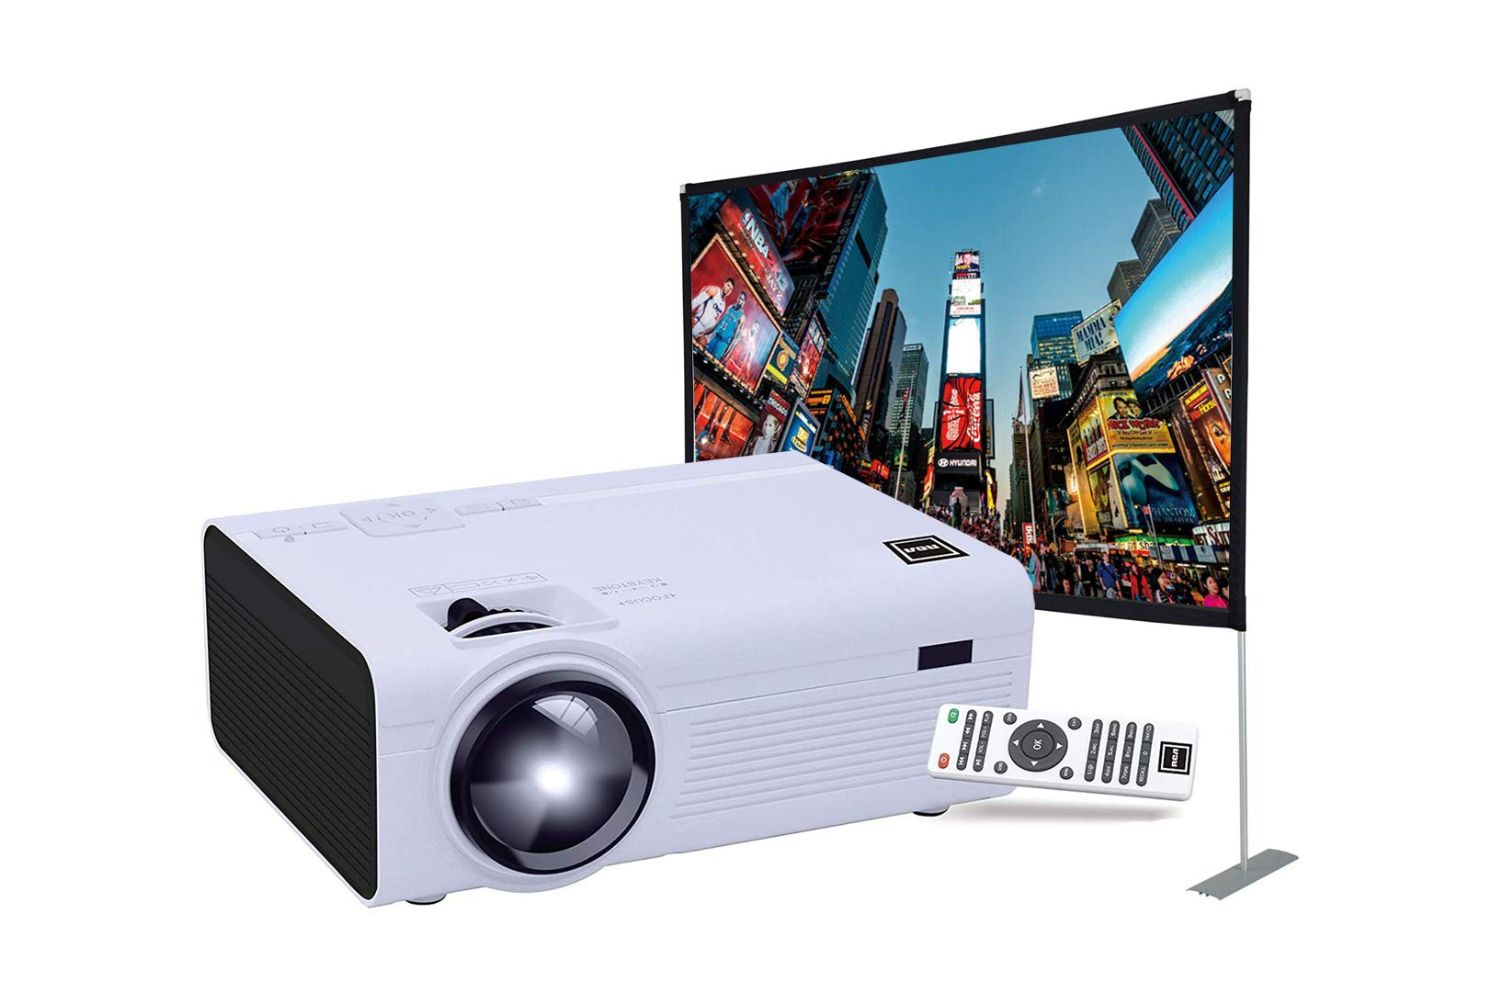 How To Use An RCA Home Theater Projector